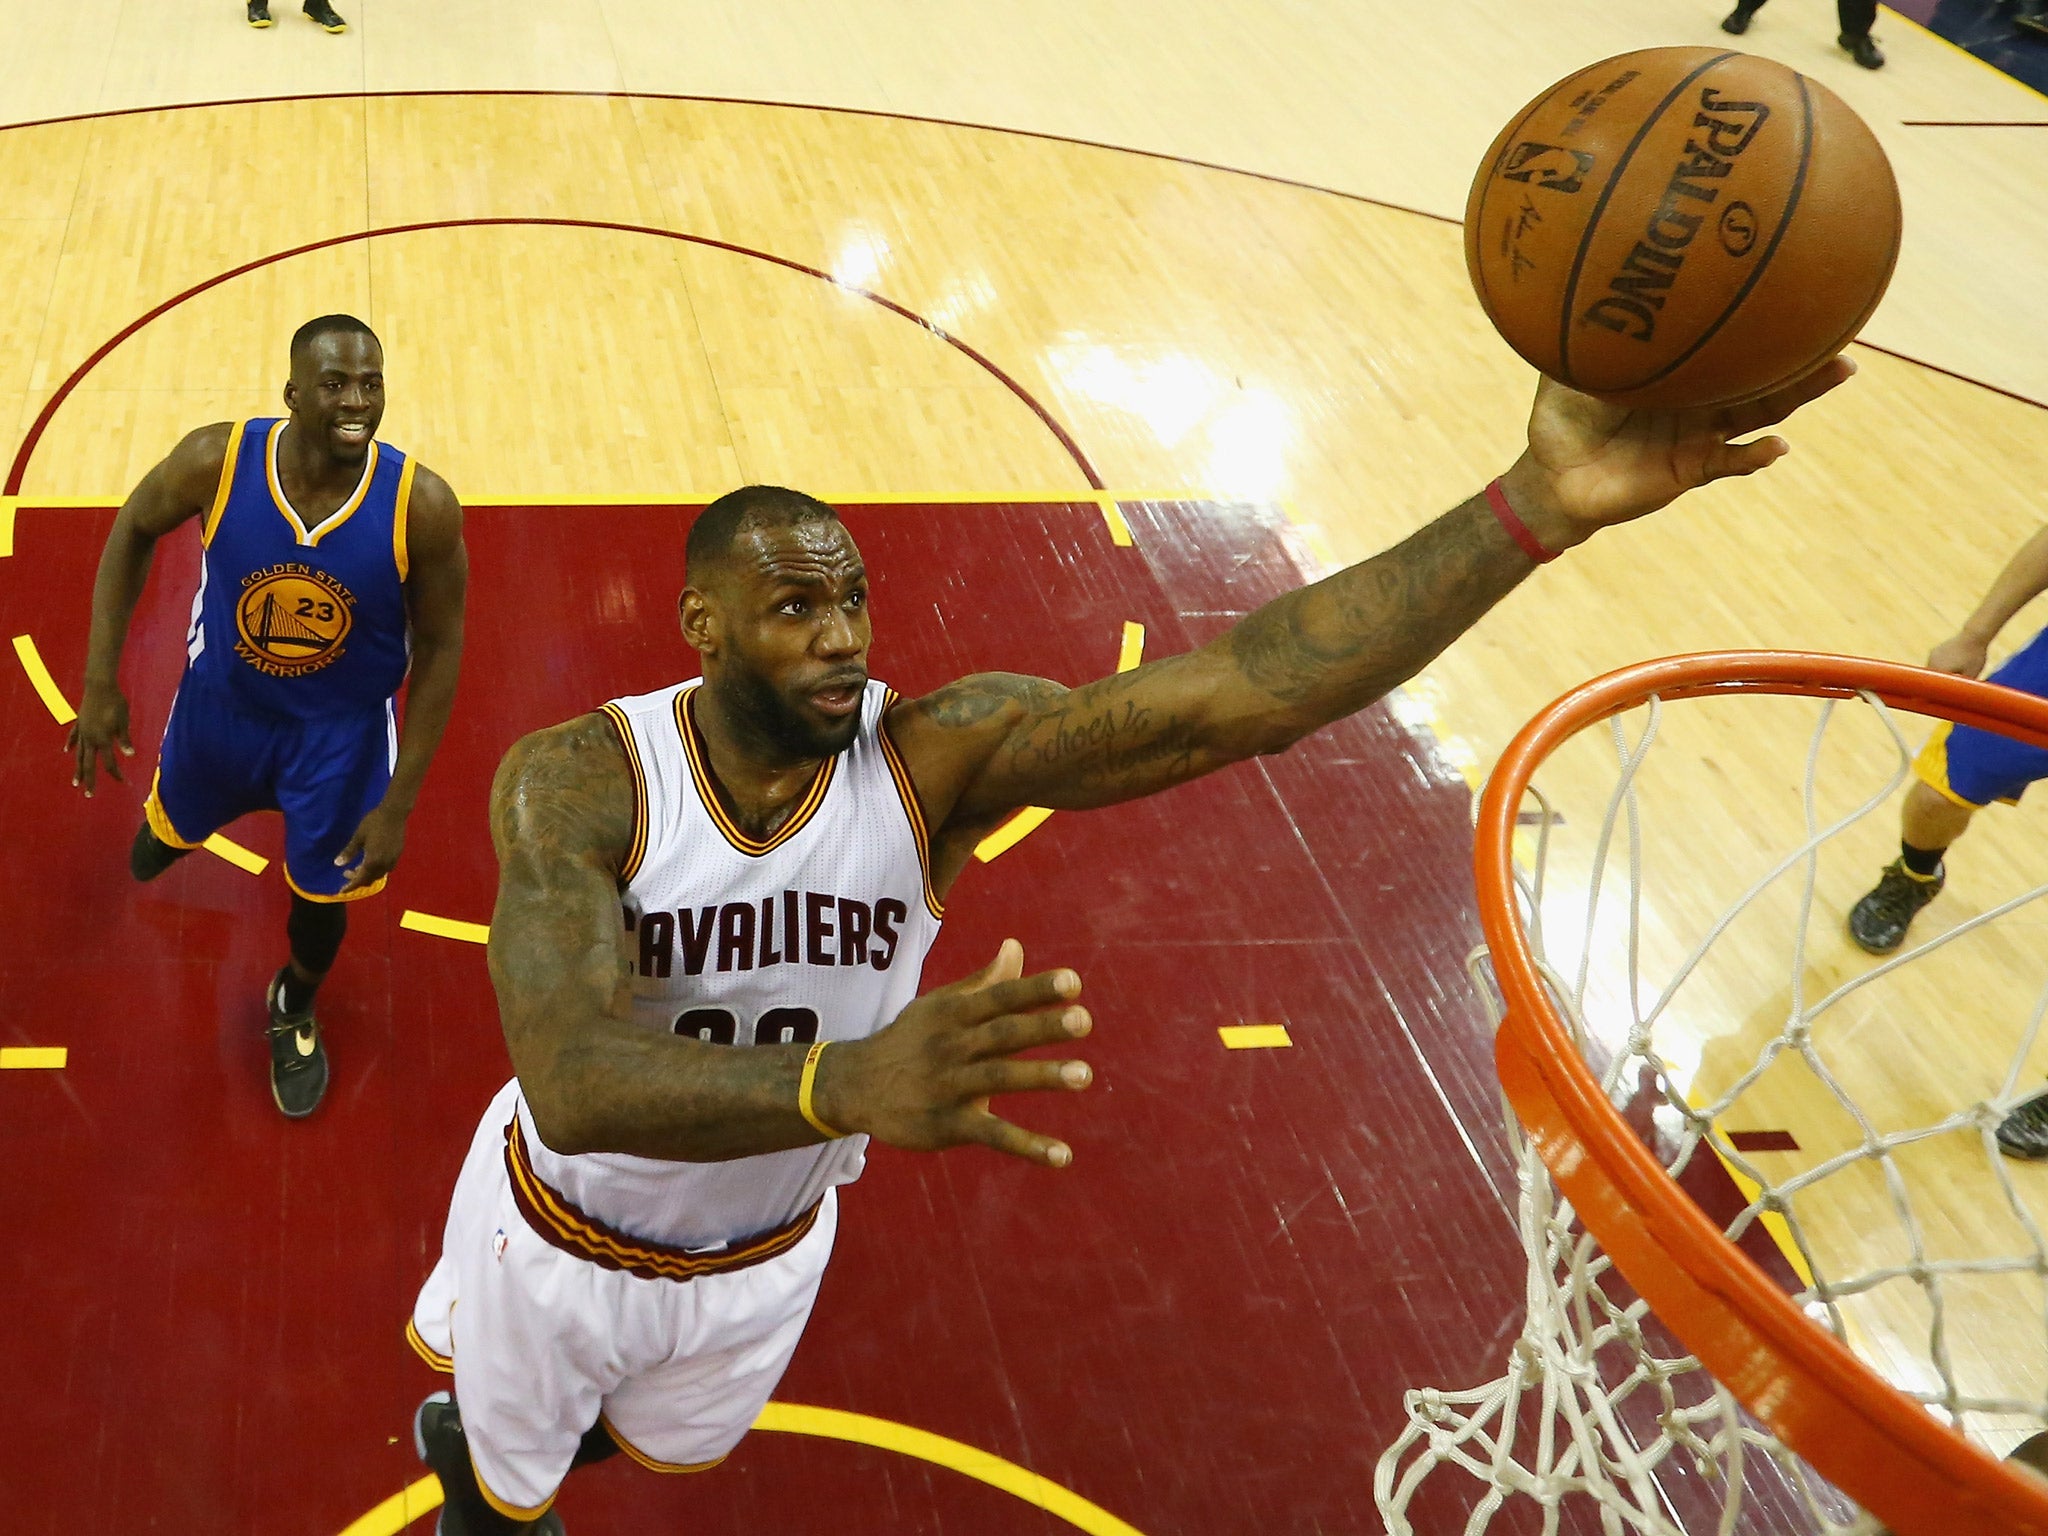 LeBron James scored a match-high 32 points to help the Cavaliers to victory